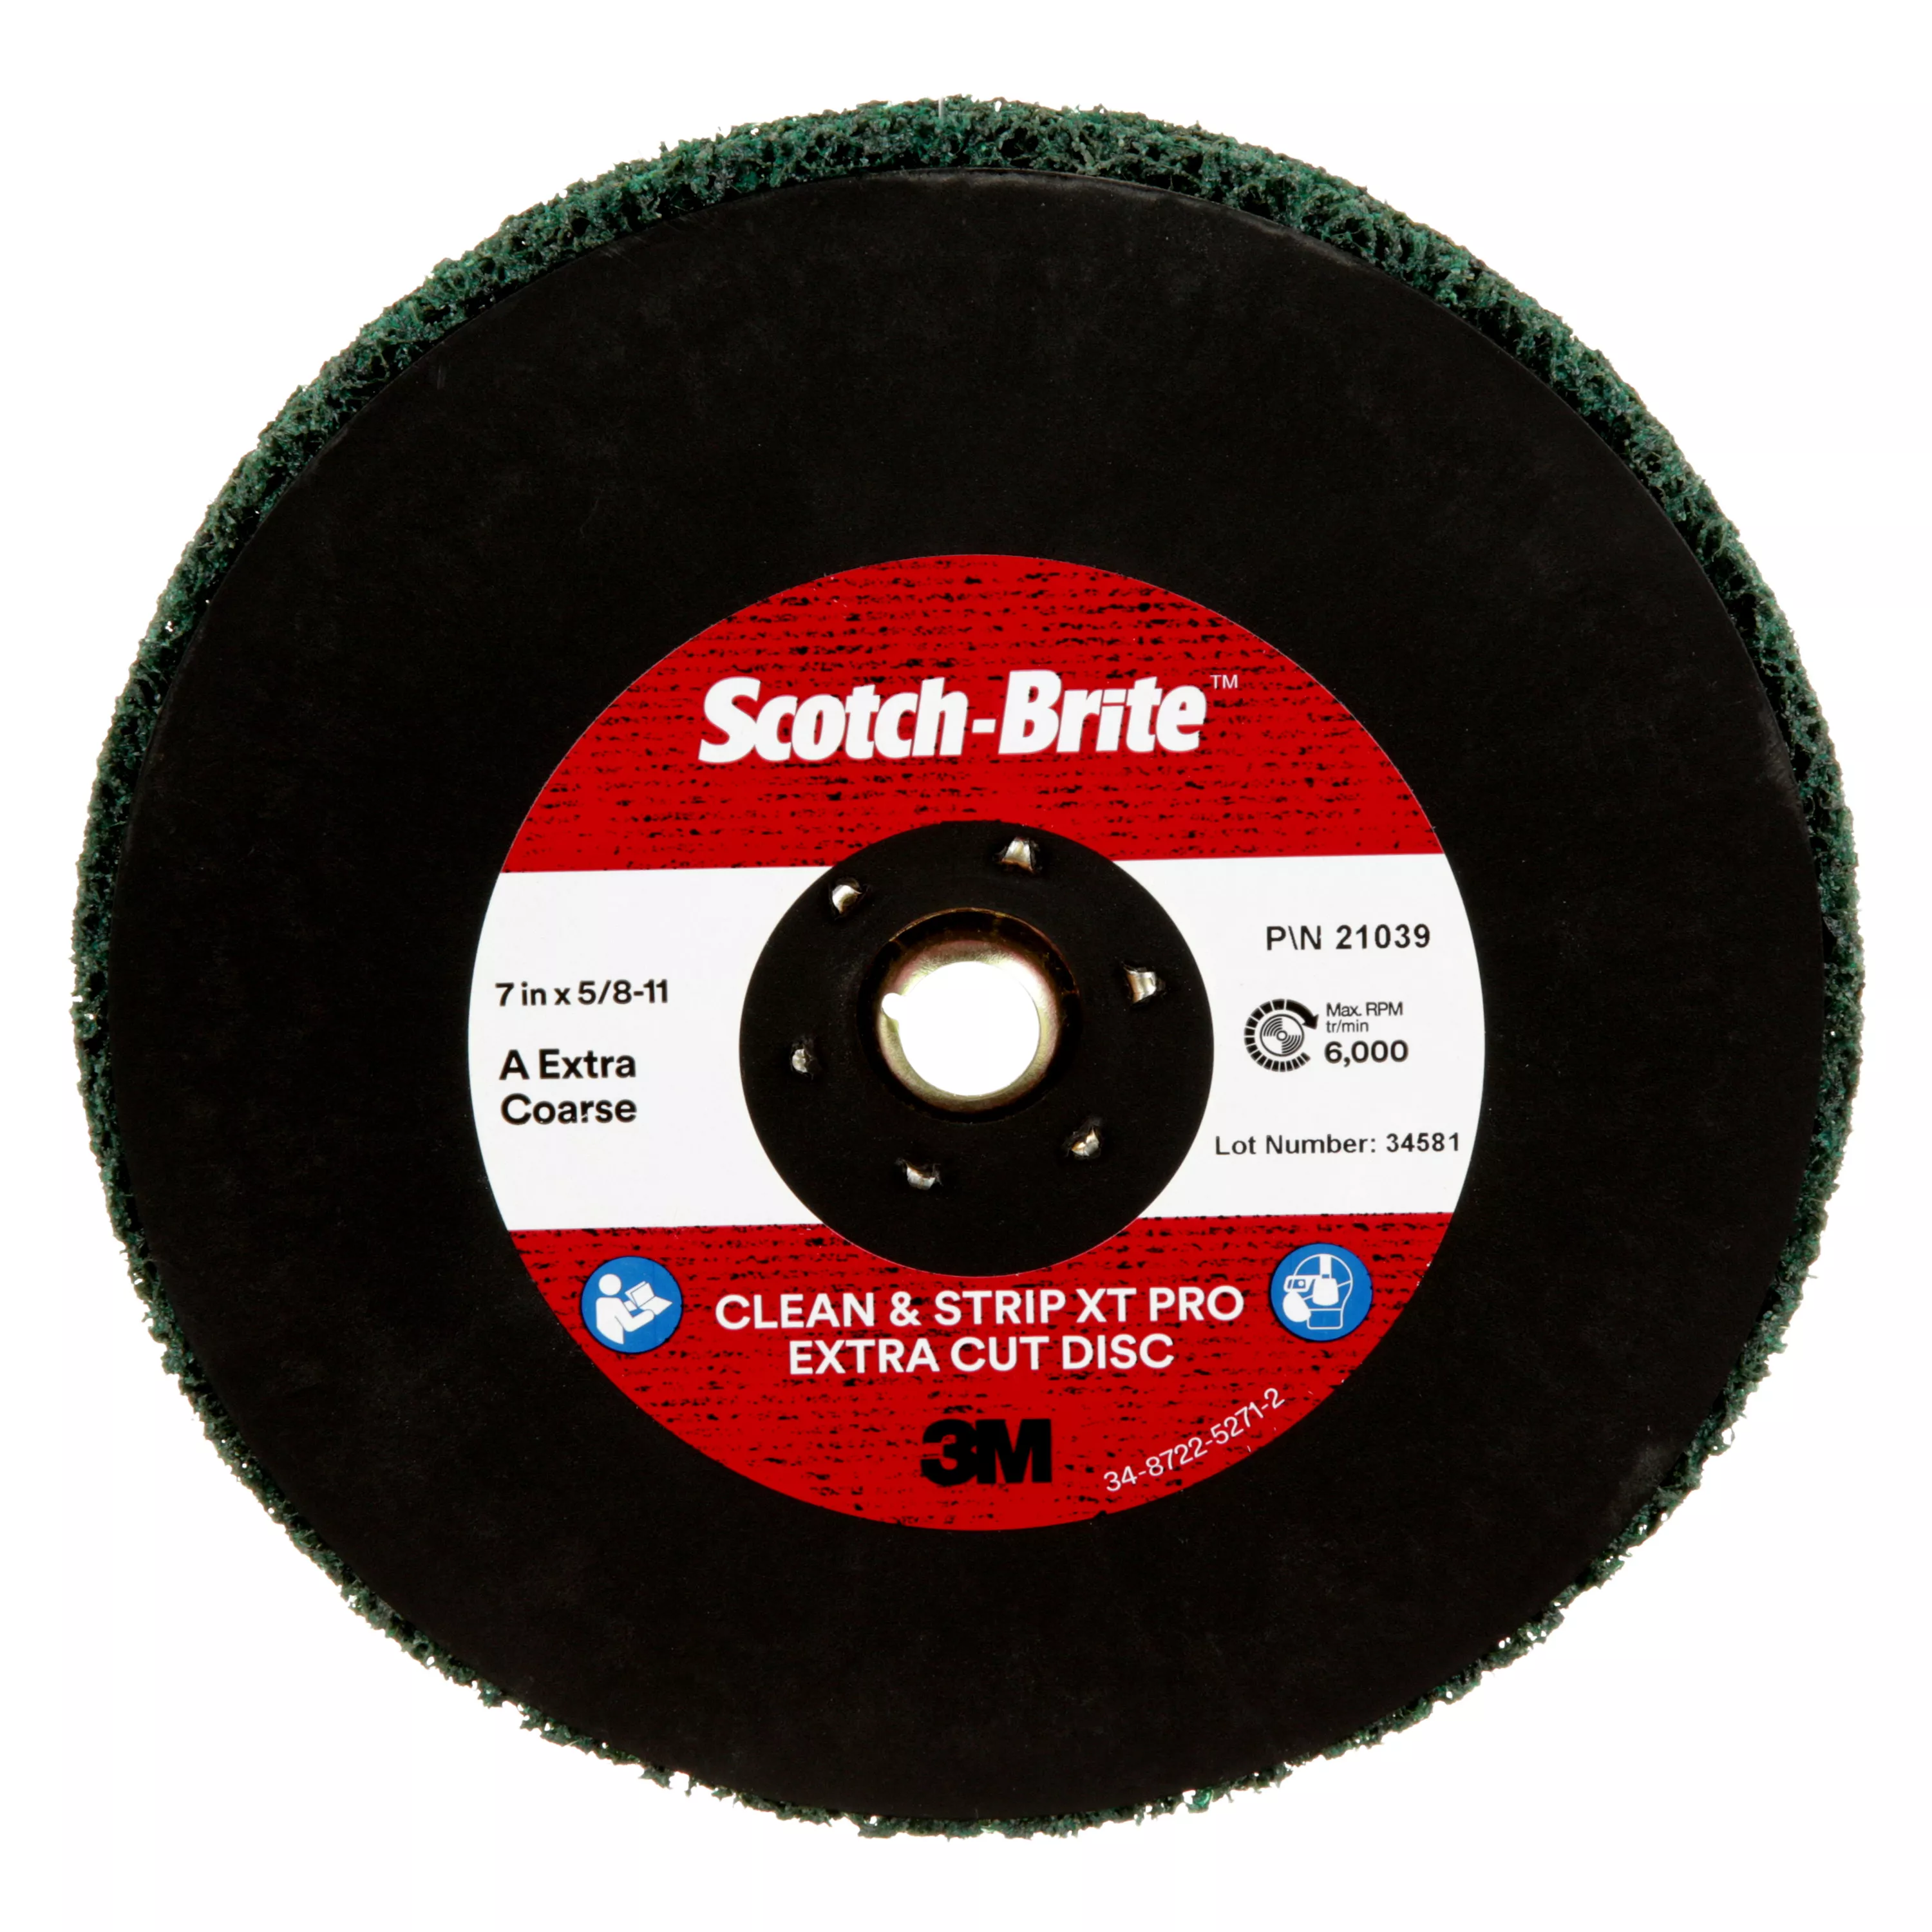 Scotch-Brite™ Clean and Strip XT Pro Extra Cut TN Quick Change Disc, XC-DN, A/O Extra Coarse, Green, 7 in x 5/8 in-11, 5 ea/Case